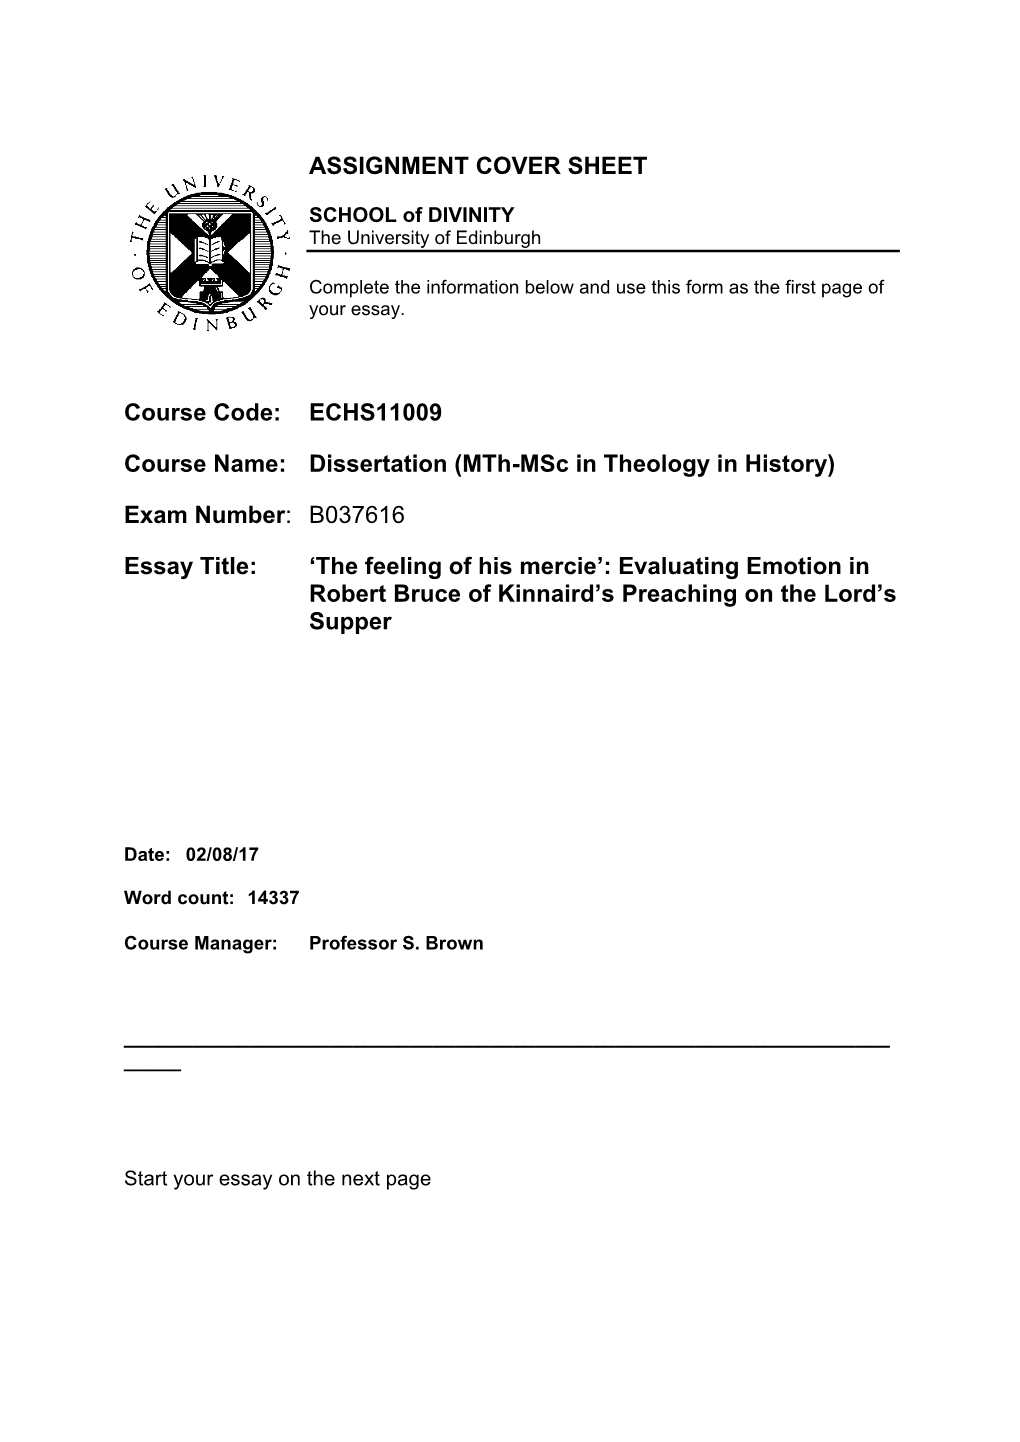 Dissertation (Mth-Msc in Theology in History) Exam